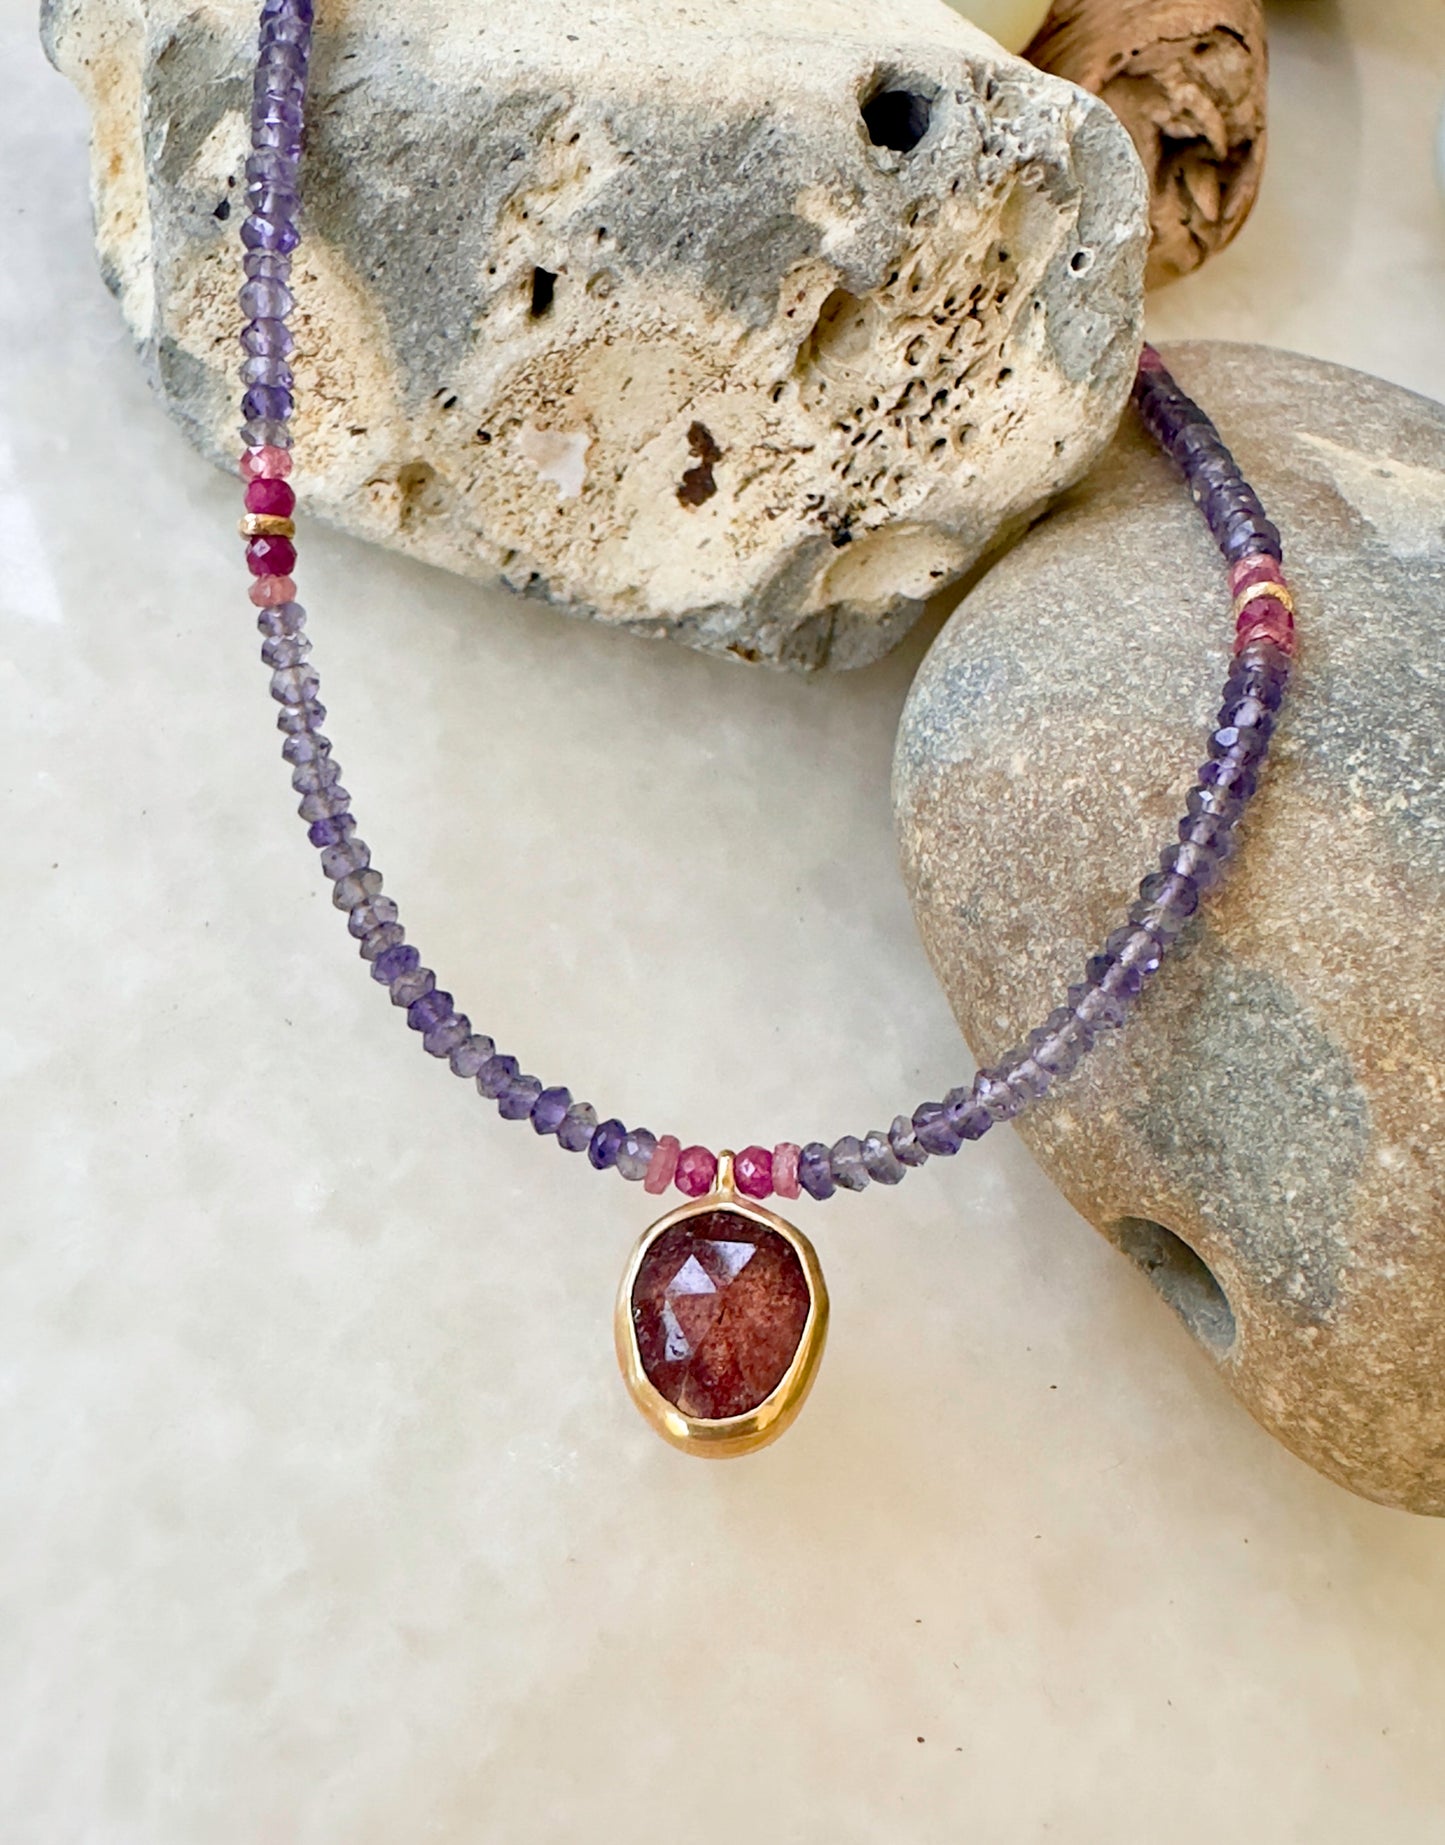 Strawberry Quartz & Iolite Necklace With Rubies, Tourmalines and 14k Gold